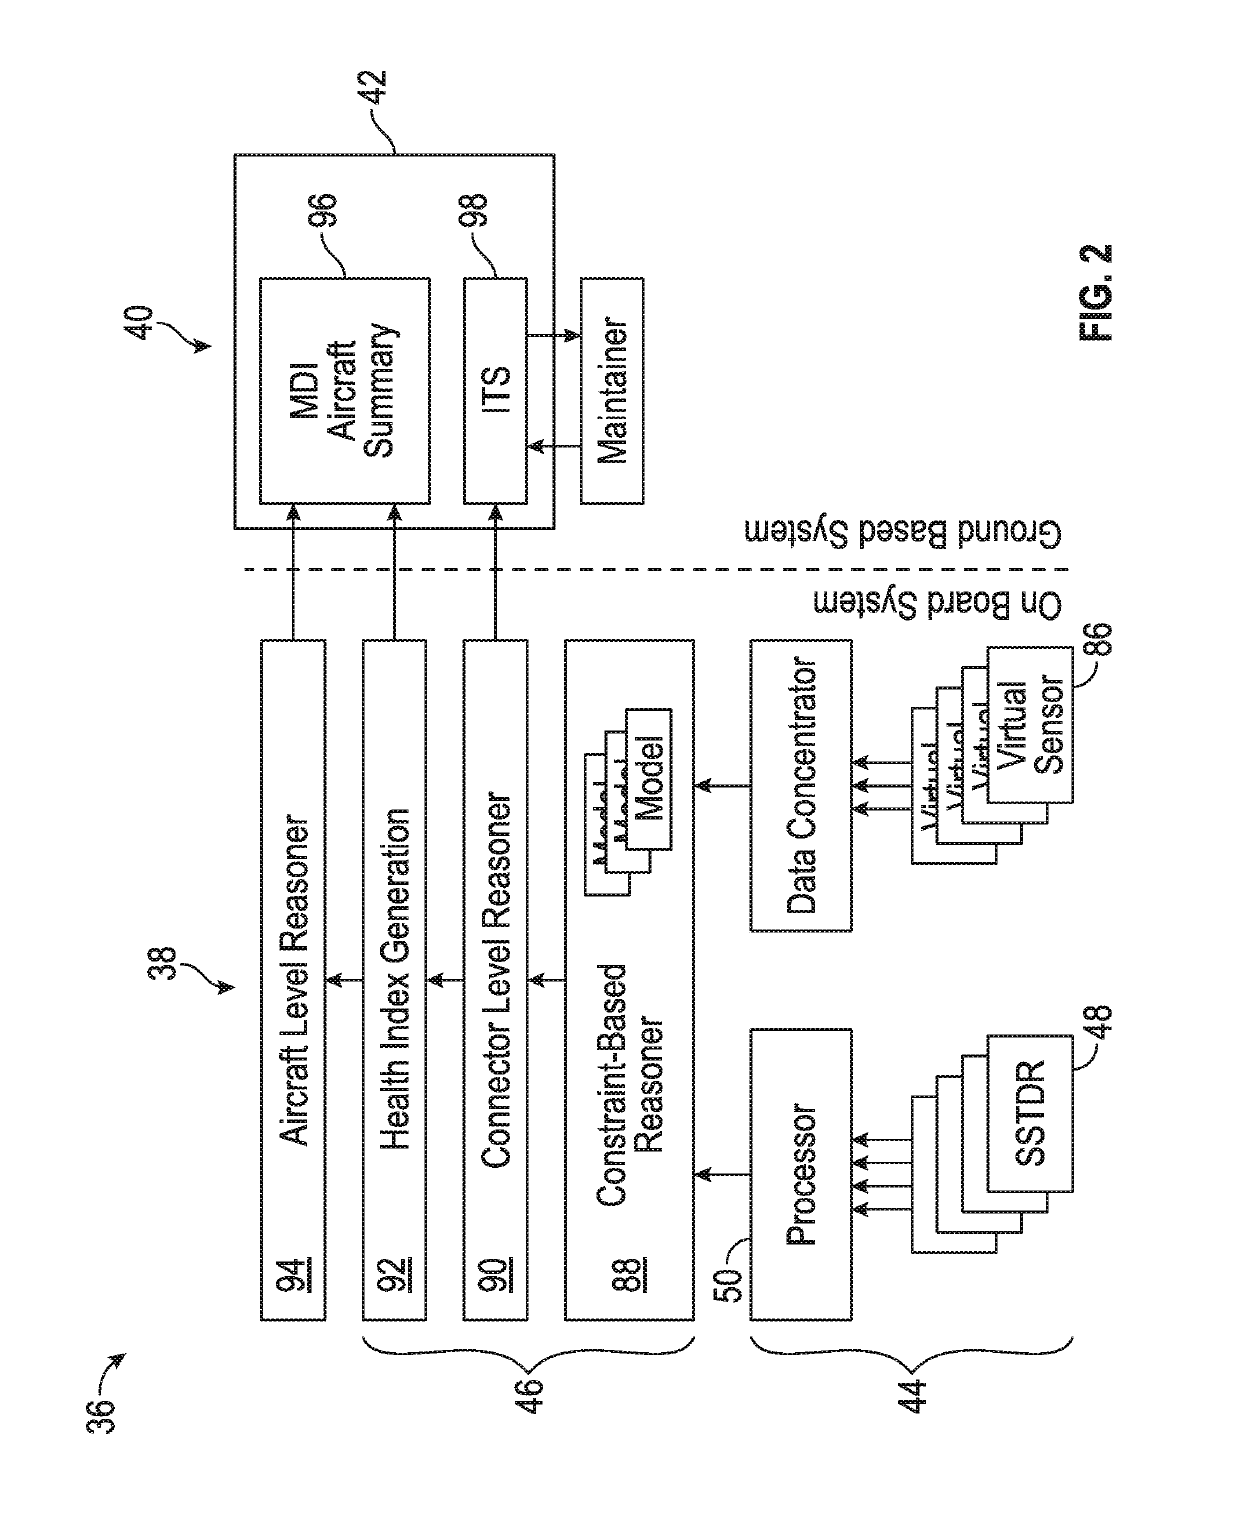 System and method for health monitoring of electrical systems